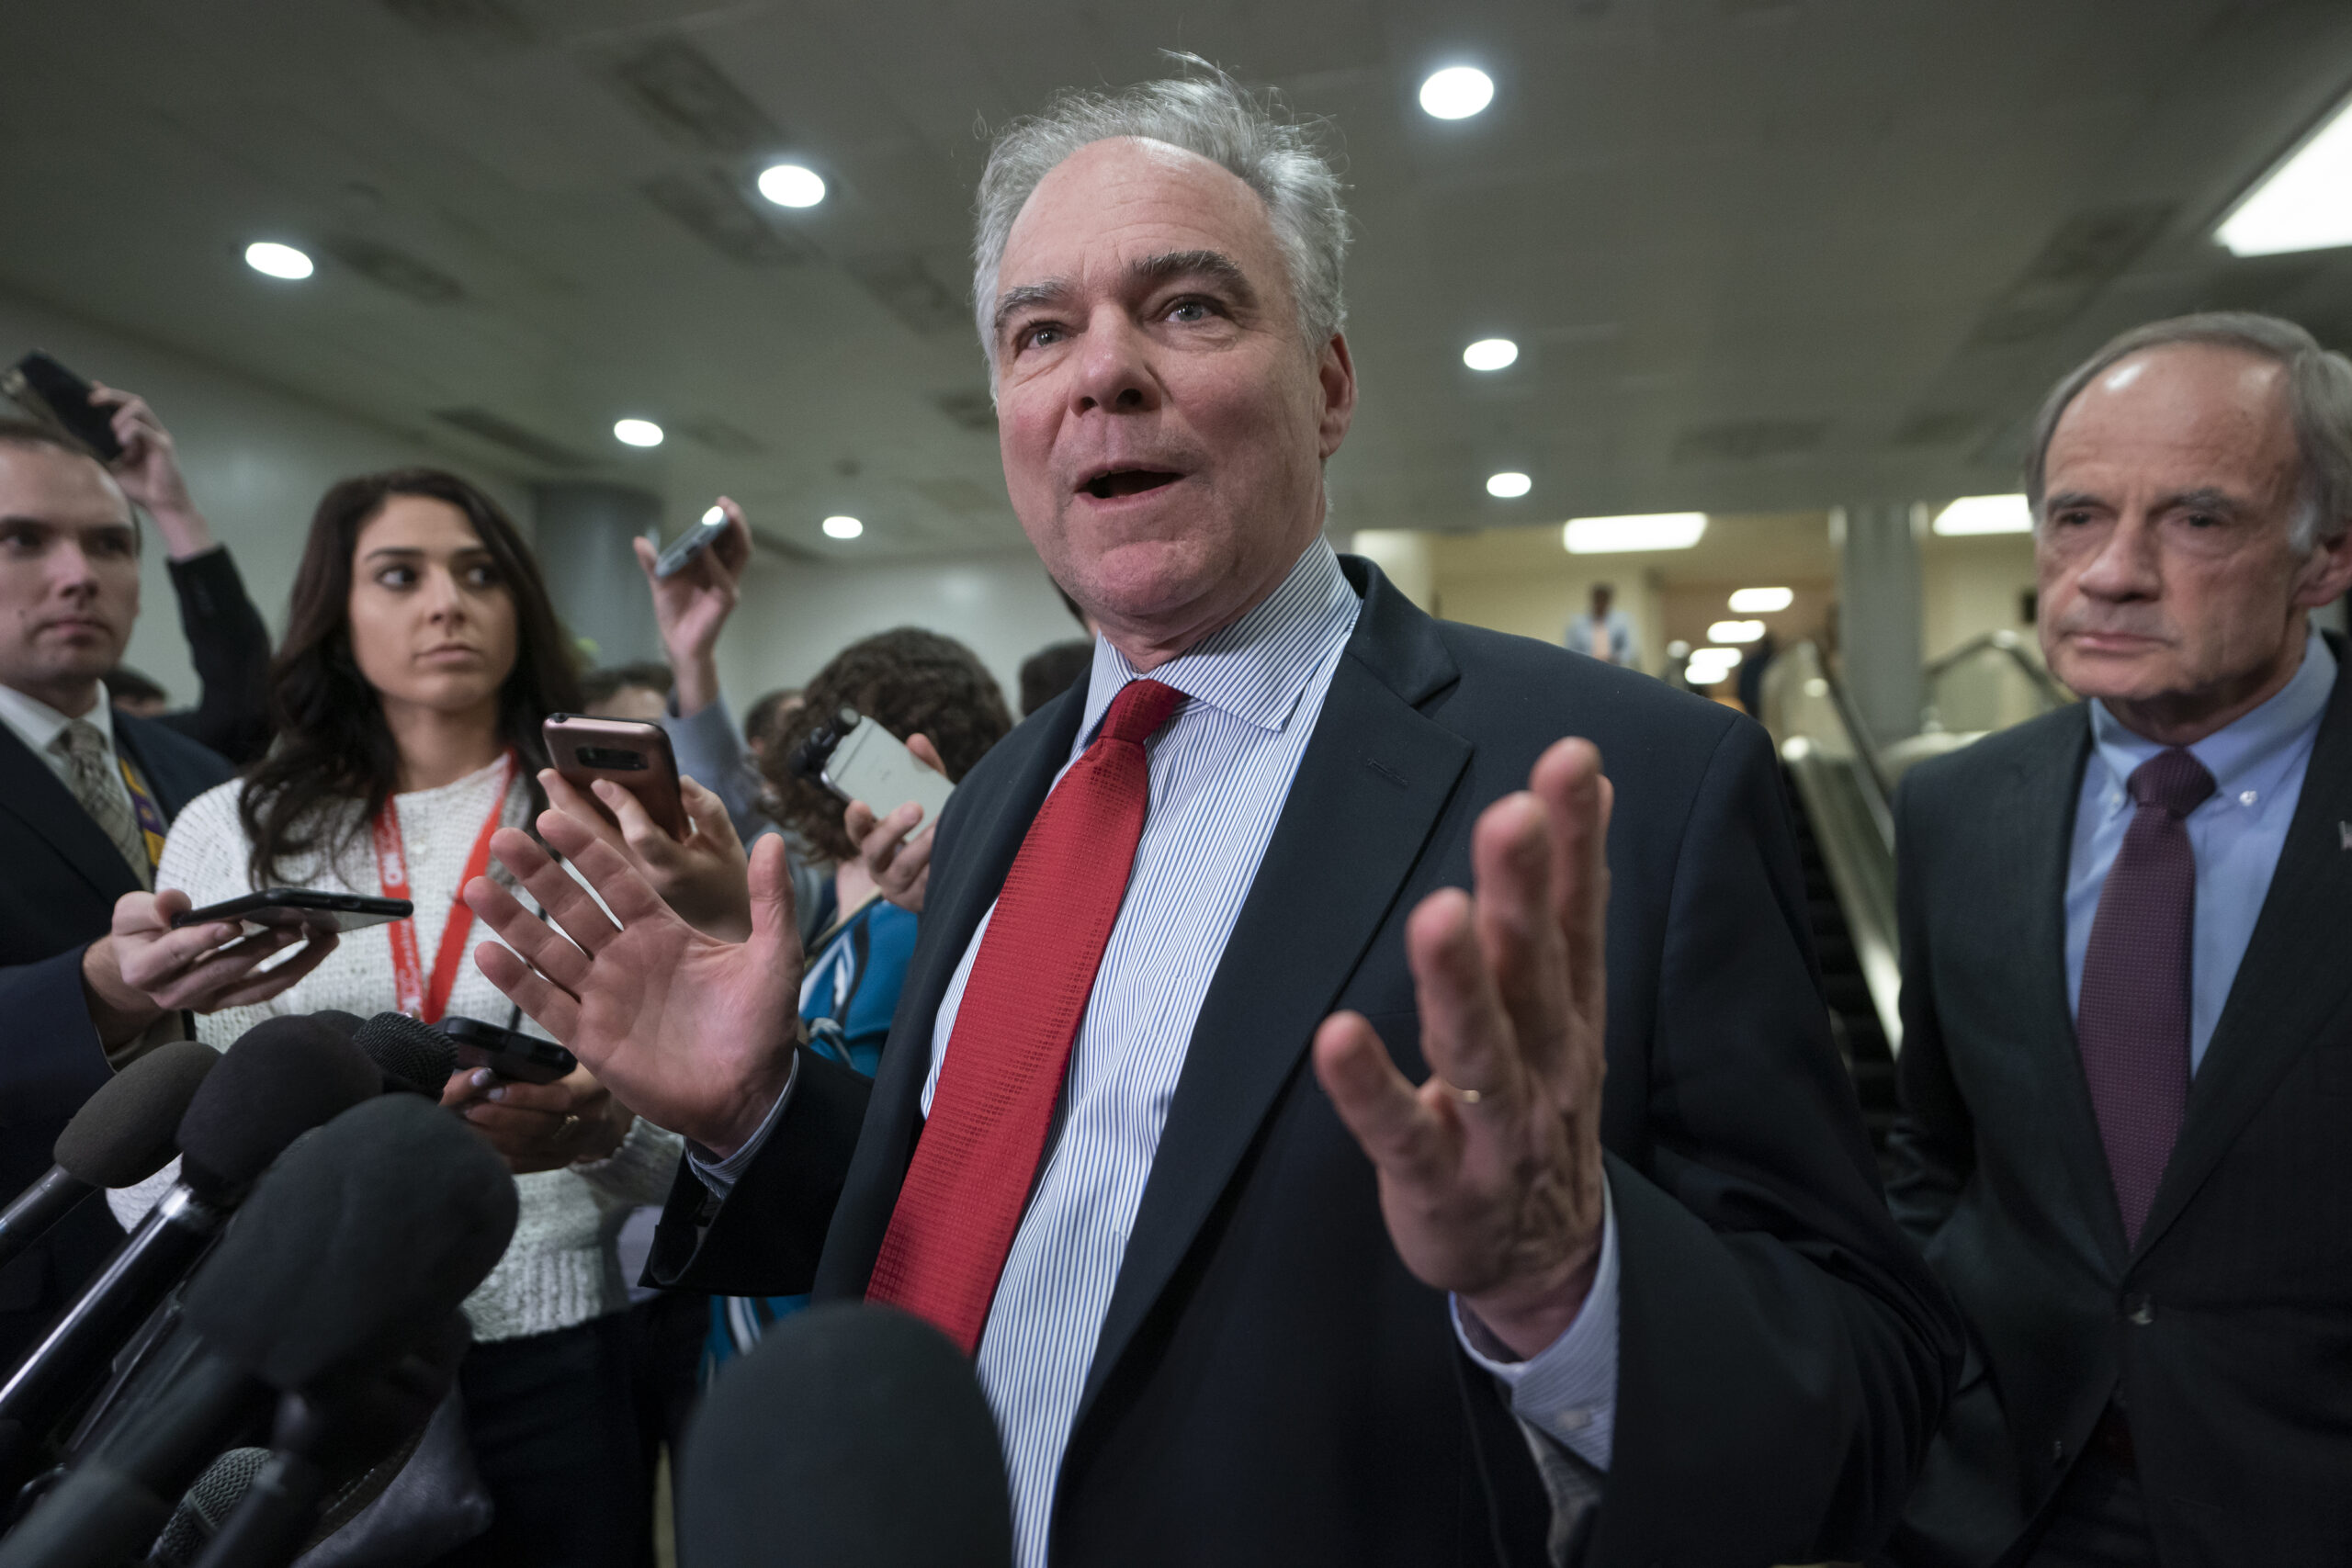 Sen. Tim Kaine, D-Va., a member of the Senate Armed Services Committee and the Foreign Relations Committee